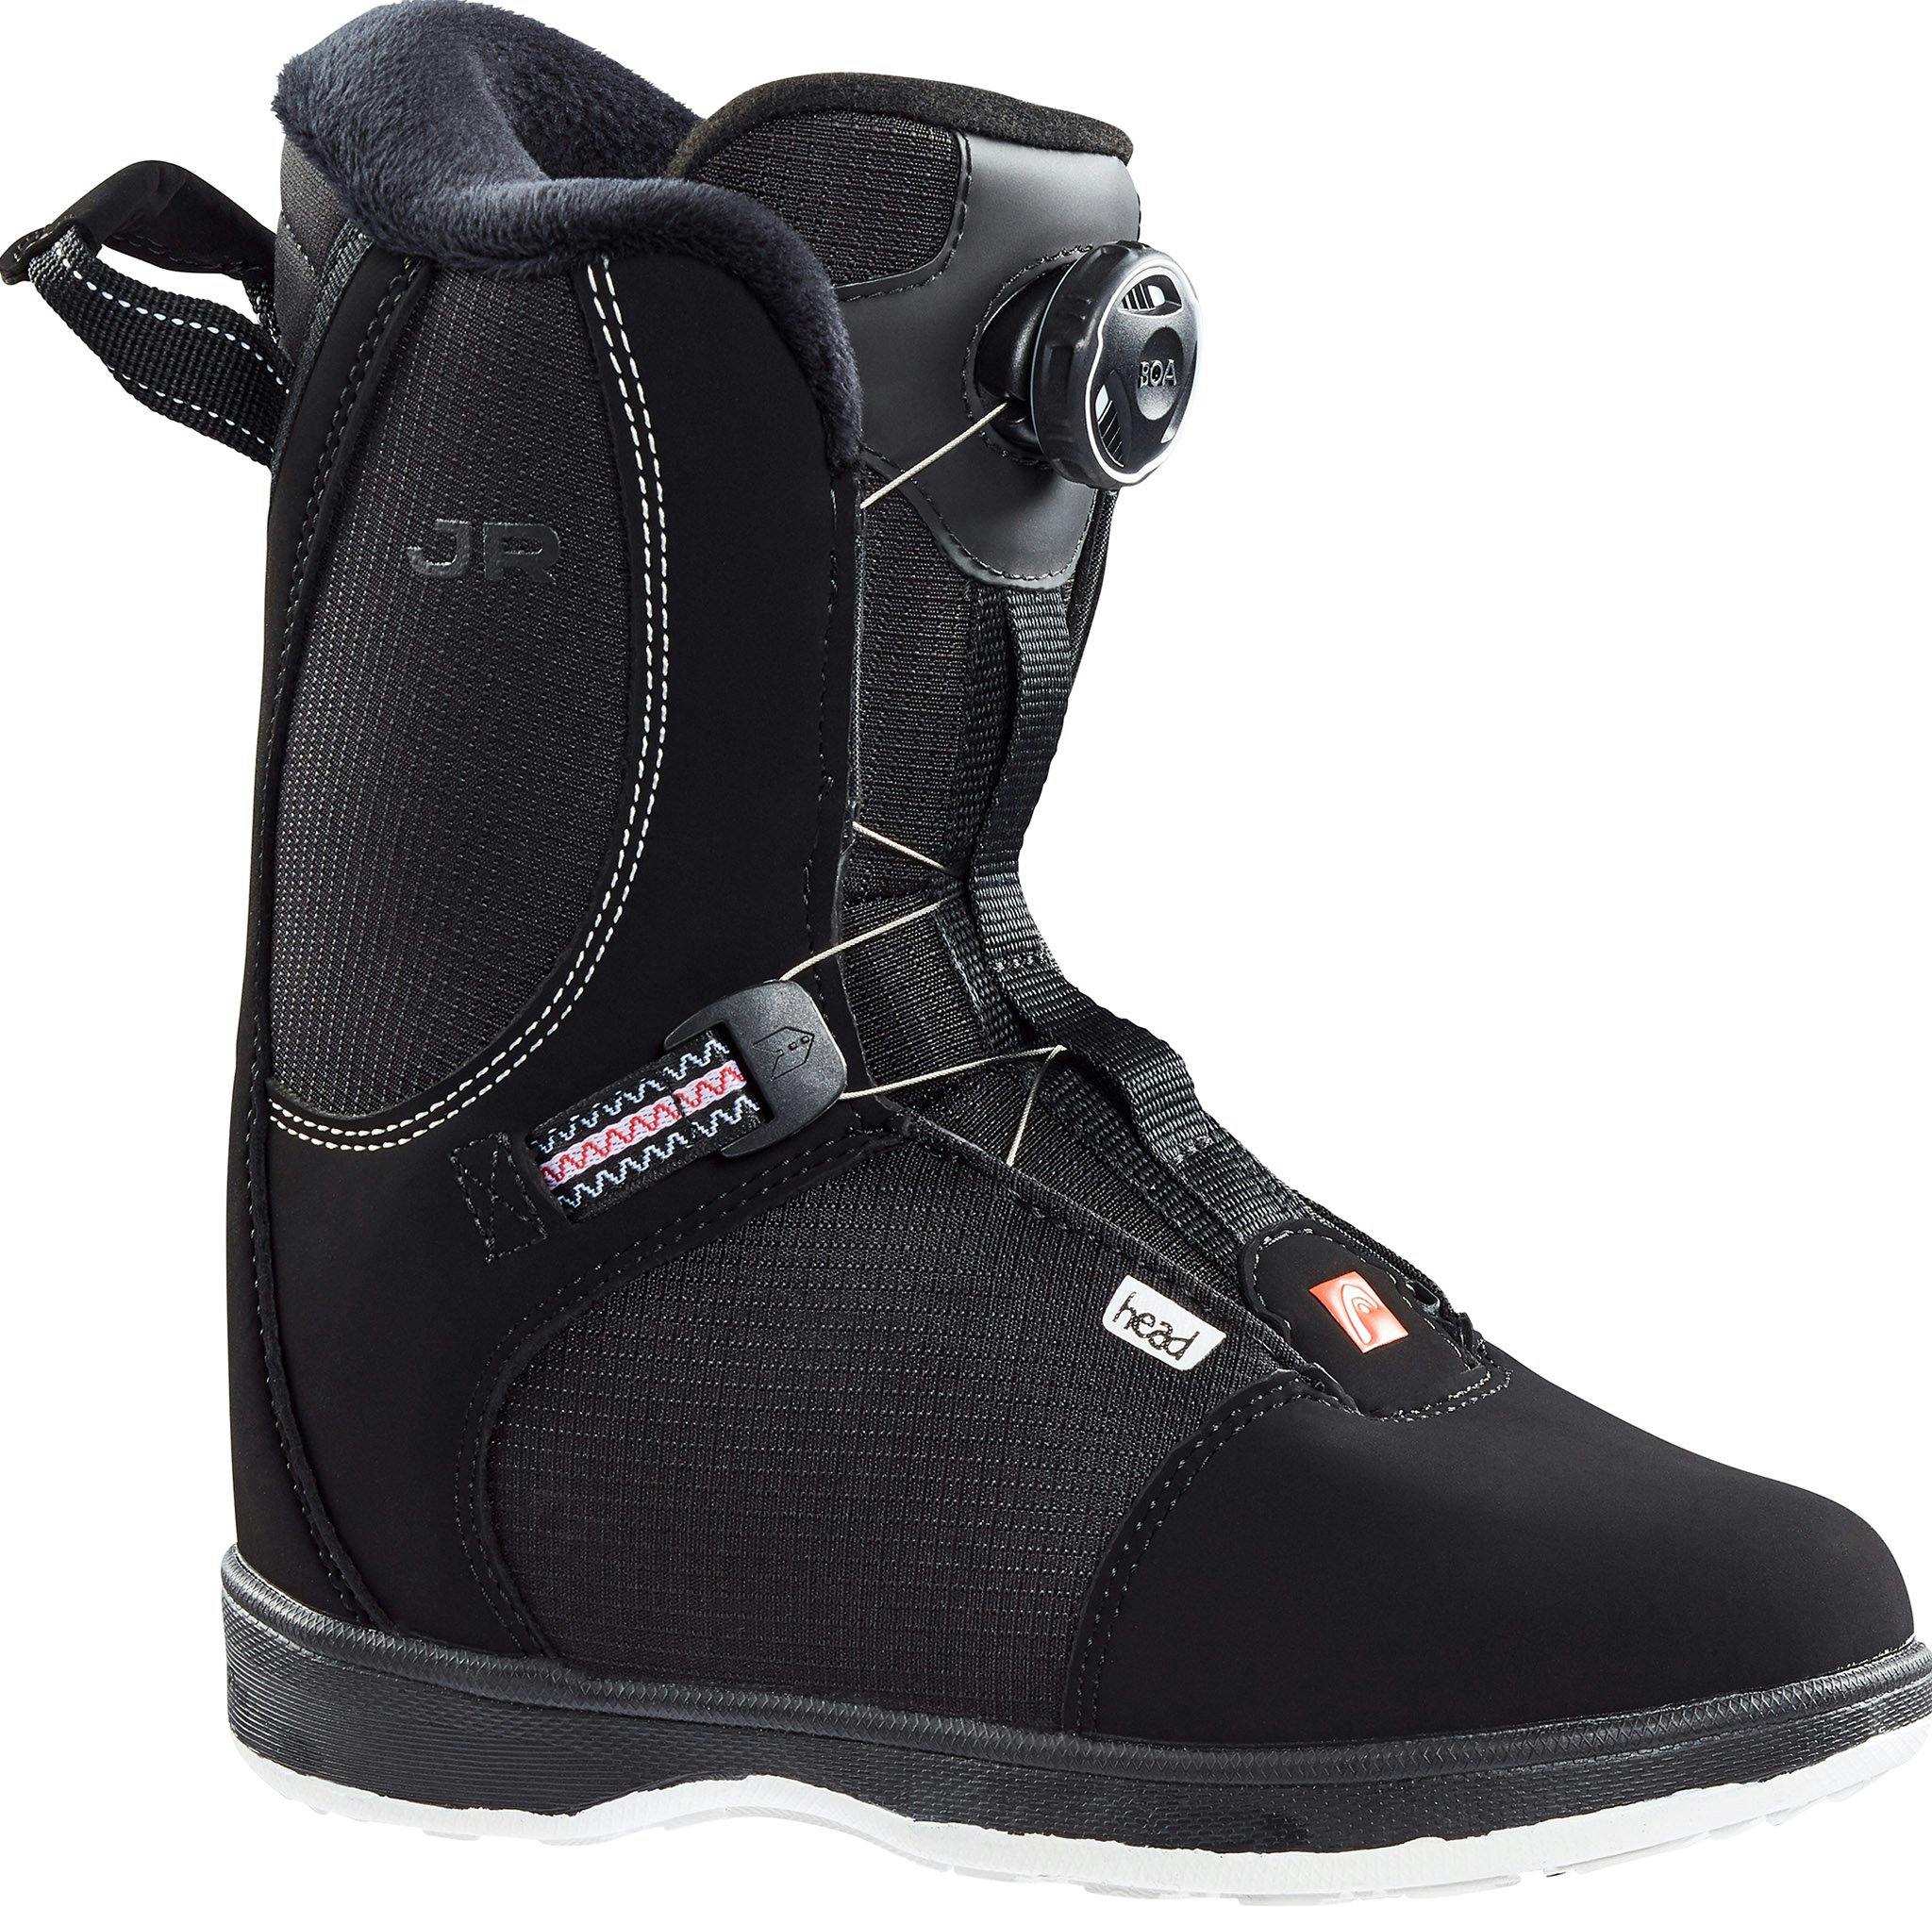 Product image for BOA Snowboard Boots - Youth